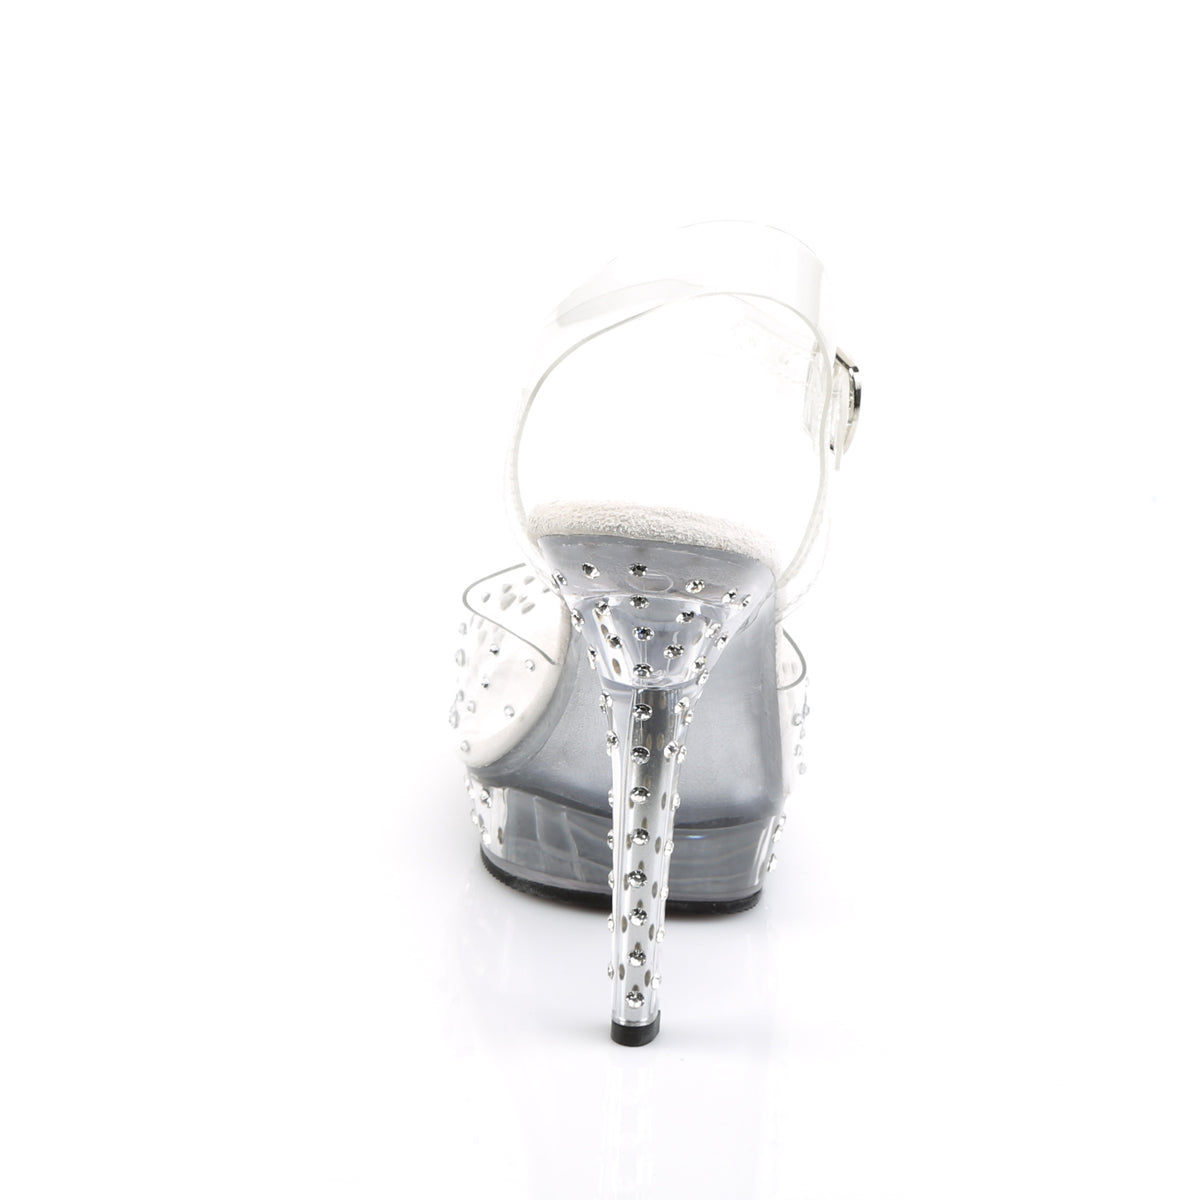 FABULICIOUS LIP-108RS CLEAR RHINESTONE BODY FITNESS 5 INCH HIGH HEEL SHOES SIZE 7